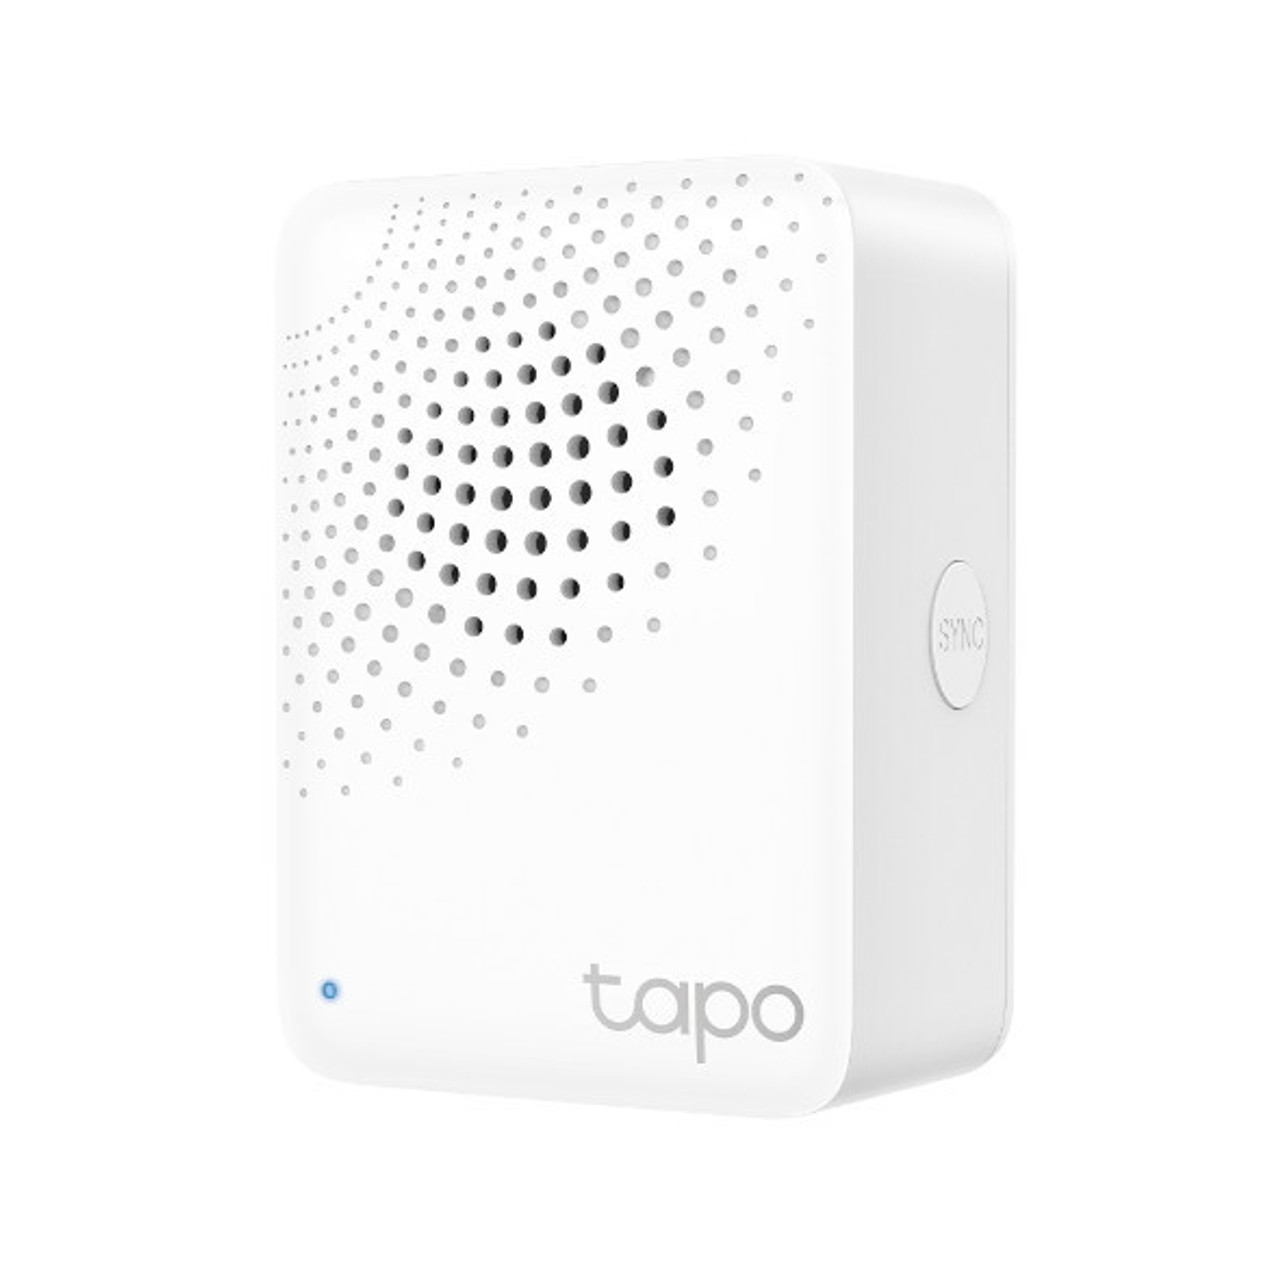 https://cdn11.bigcommerce.com/s-8ek7z3h3jn/images/stencil/1280x1280/products/9312/52433/tp-link-tapo-smart-hub-with-chime-or-tapo-h100__51501.1694762333.jpg?c=1